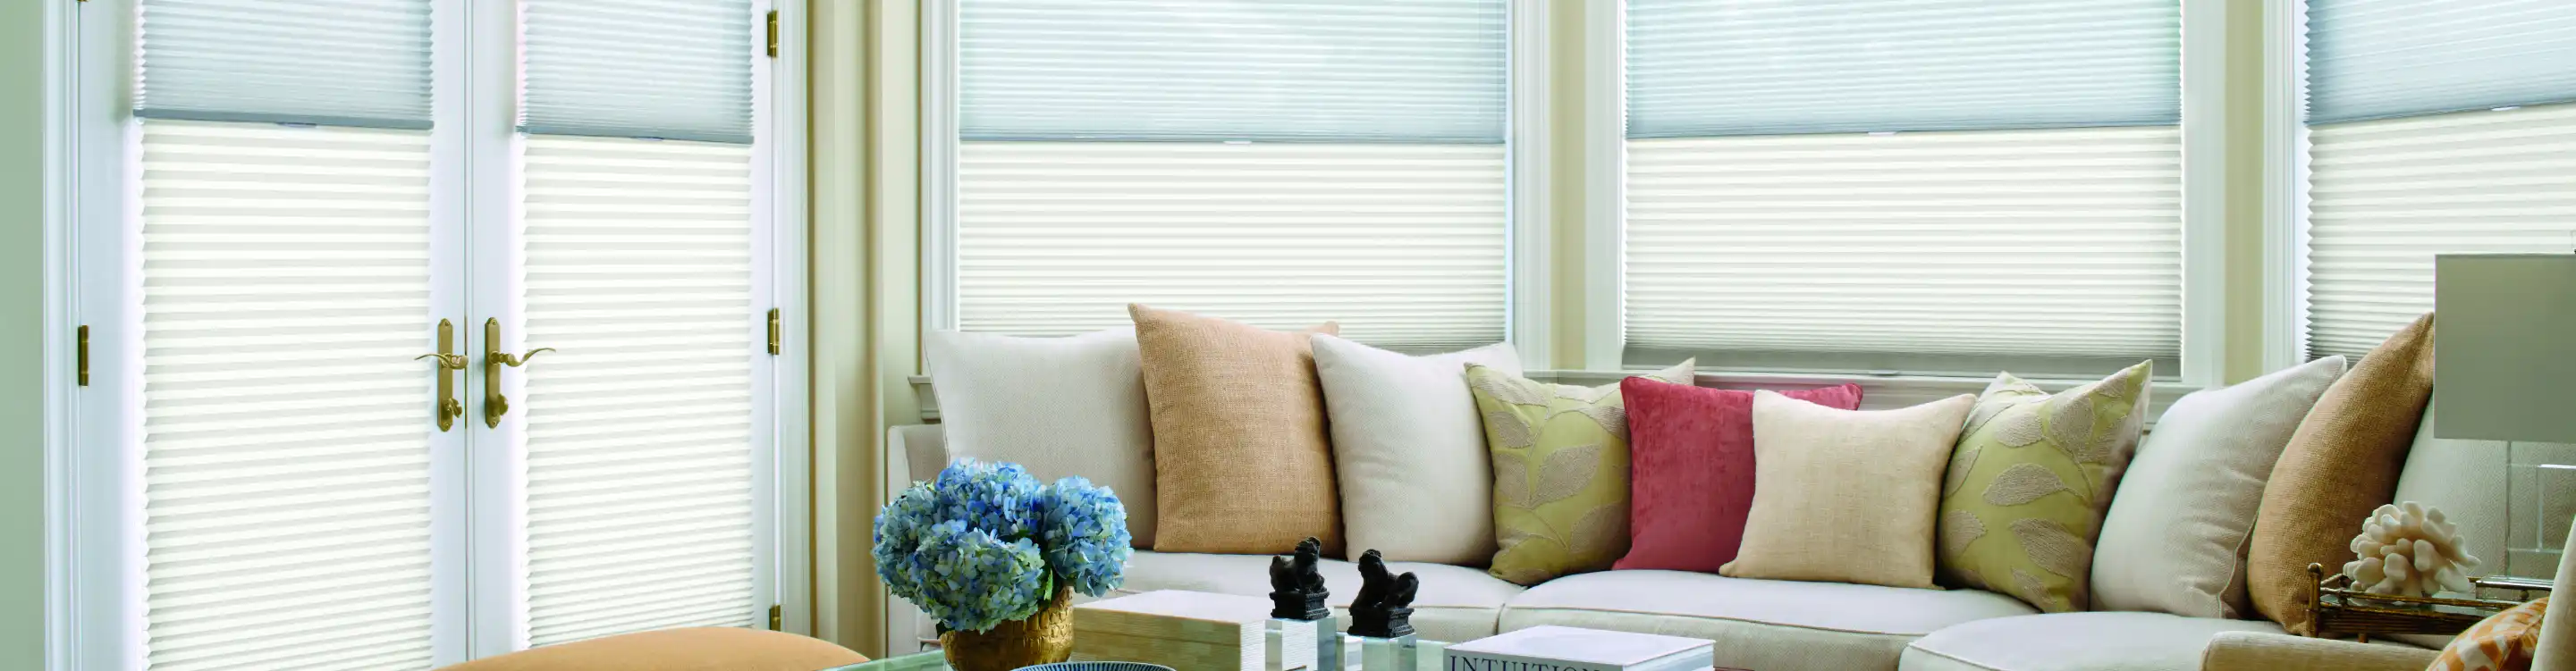 Hunter douglas blinds with colorful throw pillows and couch. 